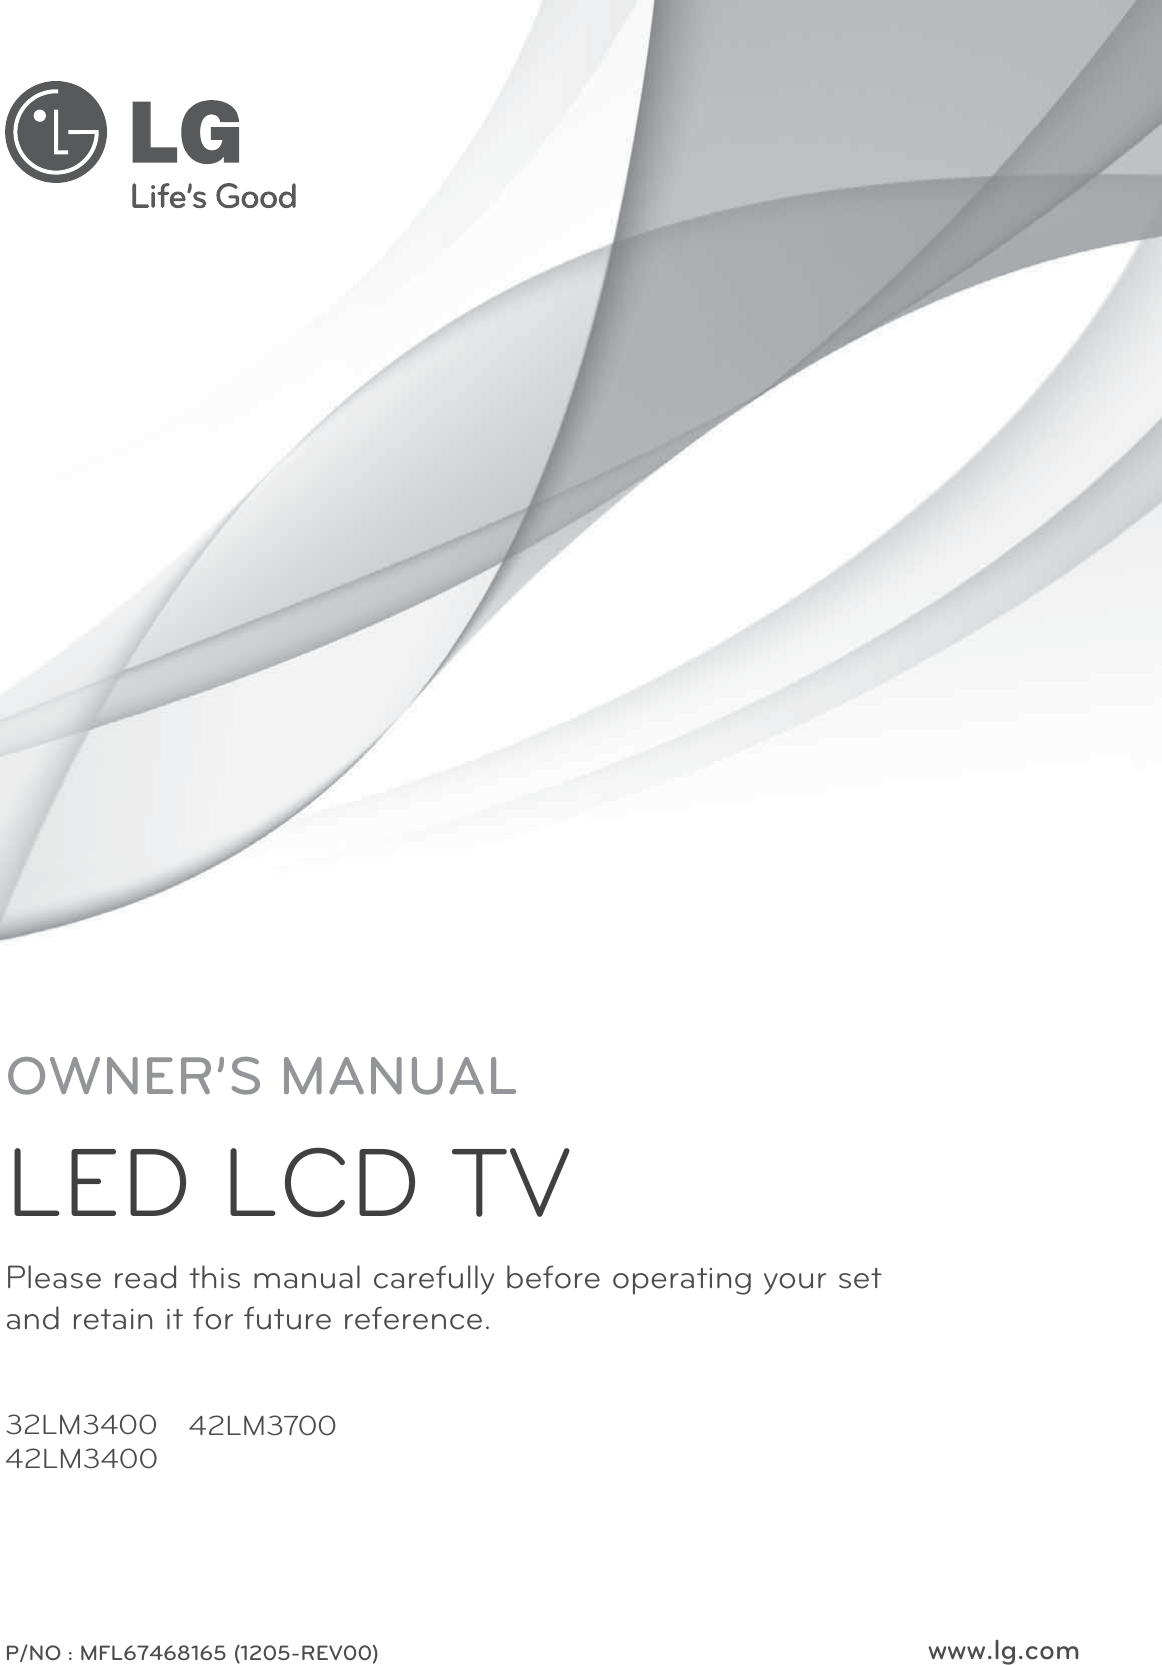 www.lg.comPlease read this manual carefully before operating your set  and retain it for future reference.P/NO : MFL67468165 (1205-REV00)OWNER’S MANUALLED LCD TV32LM340042LM340042LM3700